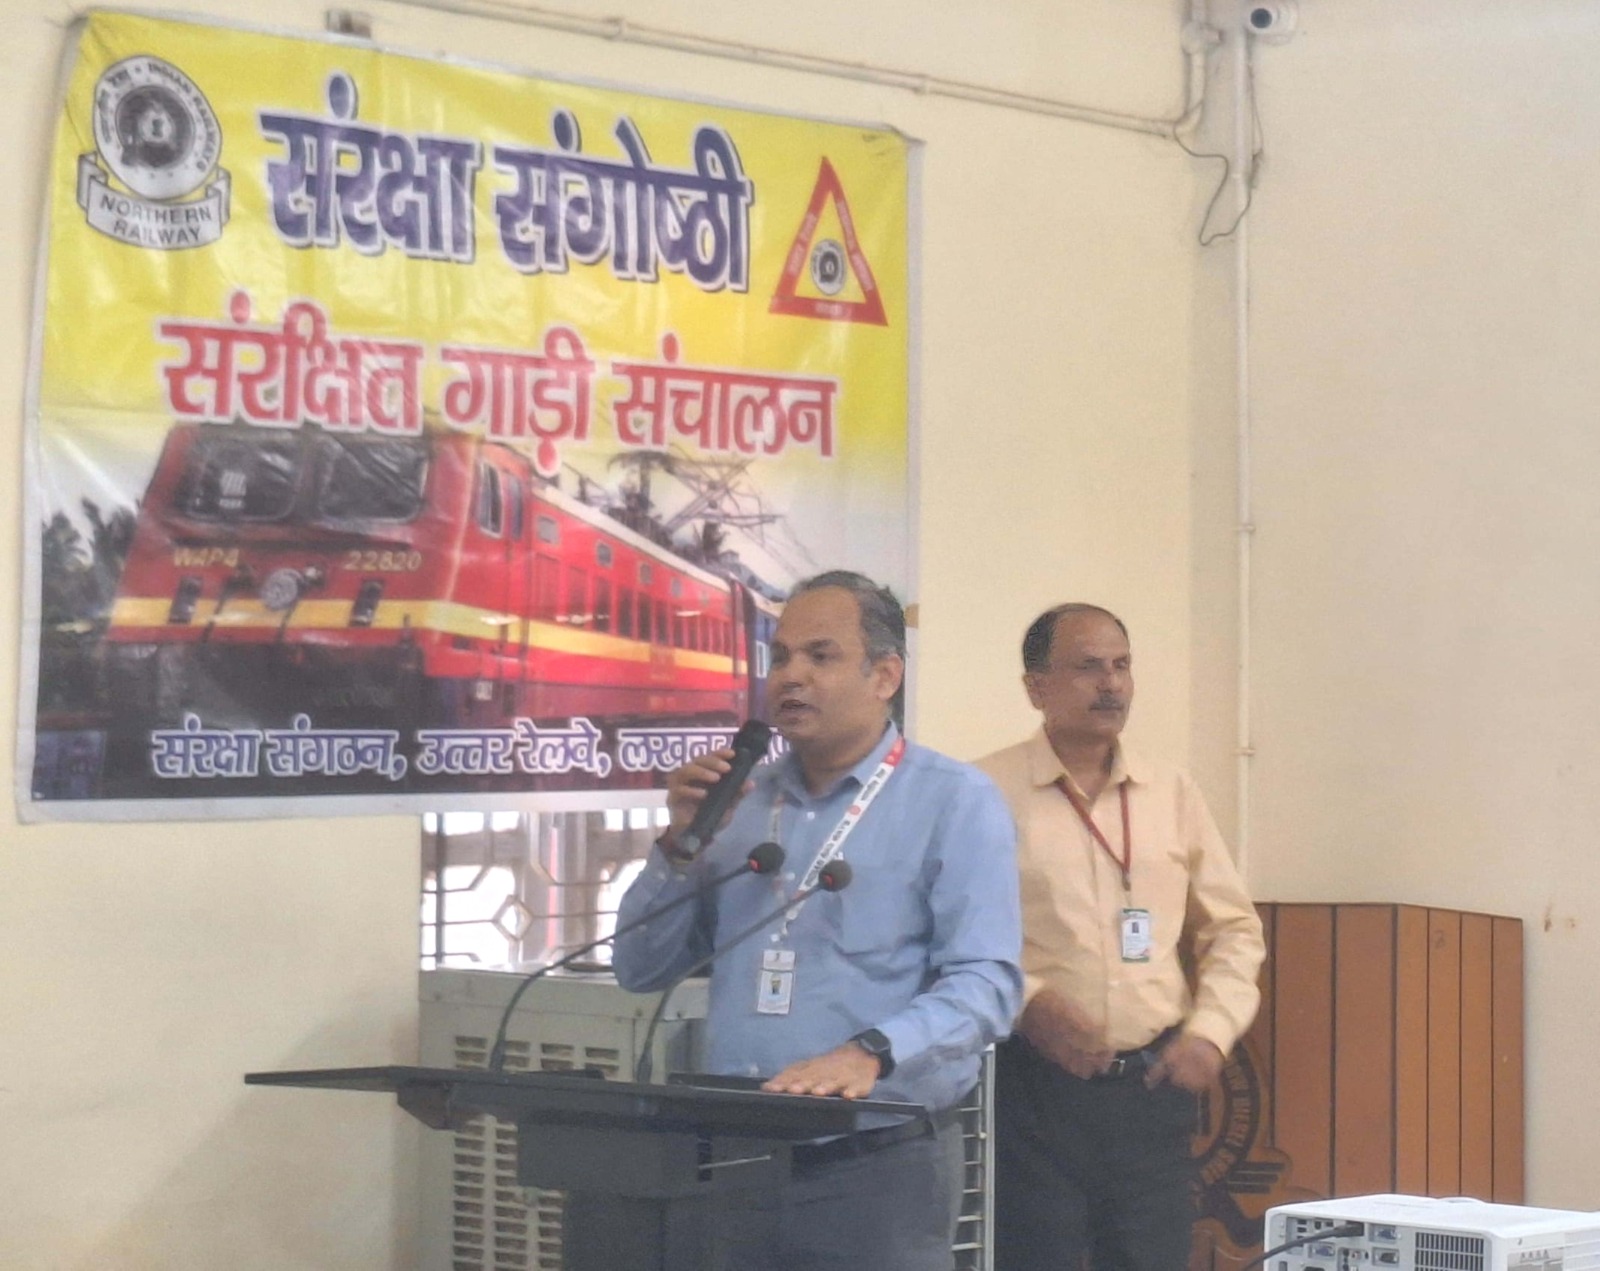 Safety seminar organized at the training center located in diesel shed, Lucknow